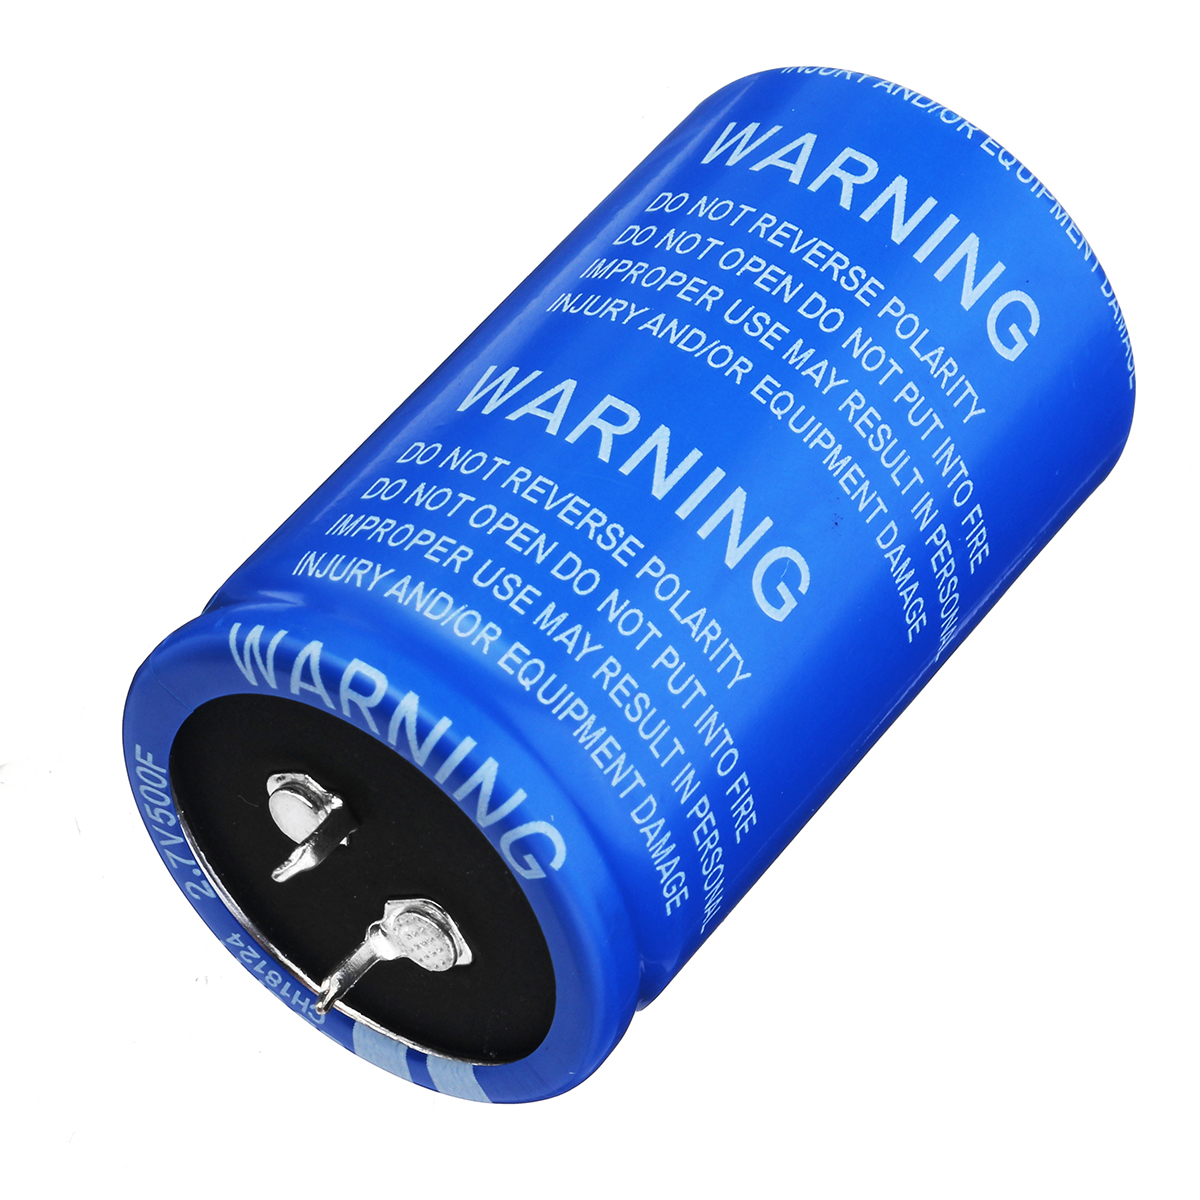 

5pcs Super Fala Capacitor 2.7v500f Can Be Used As Vehicle Rectifier Low Temperature Starting Capacitor Blue 2.7V 500F